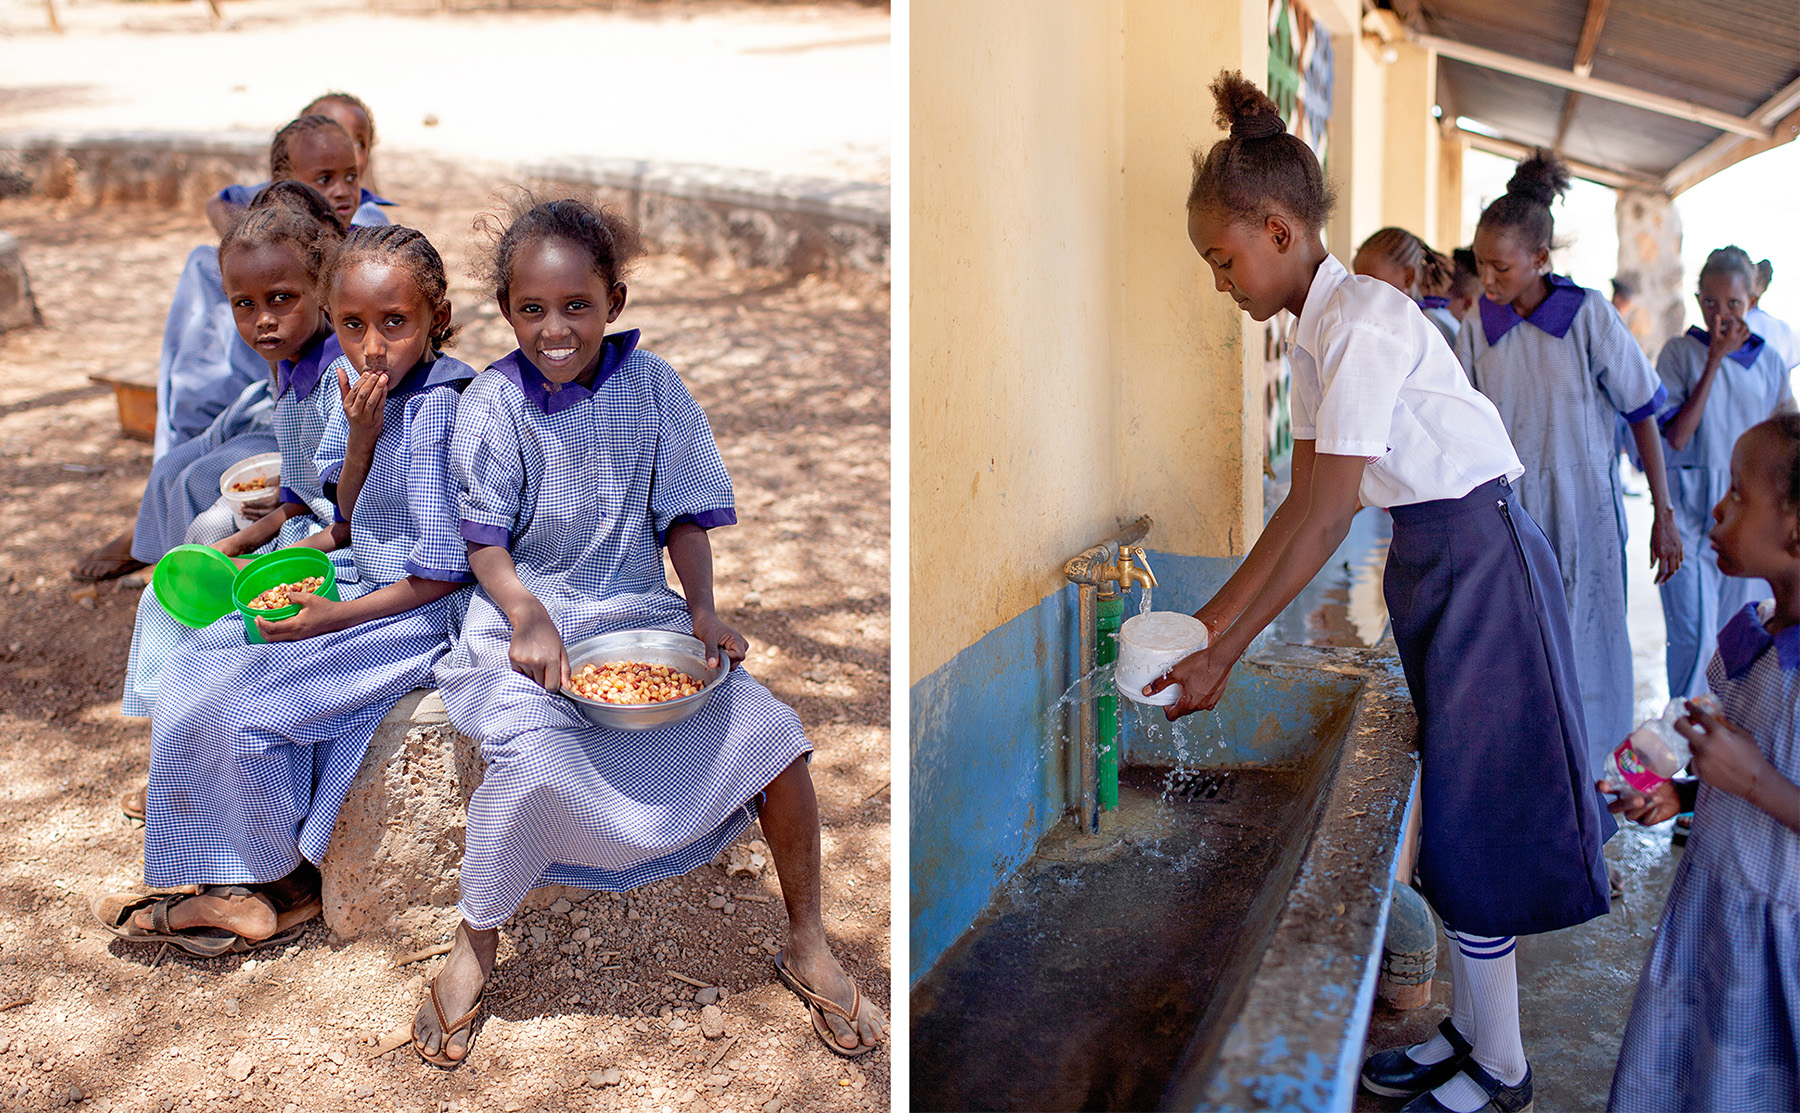 Students eating bowls of githeri on an outdoor bench; student washing a container under a spigot